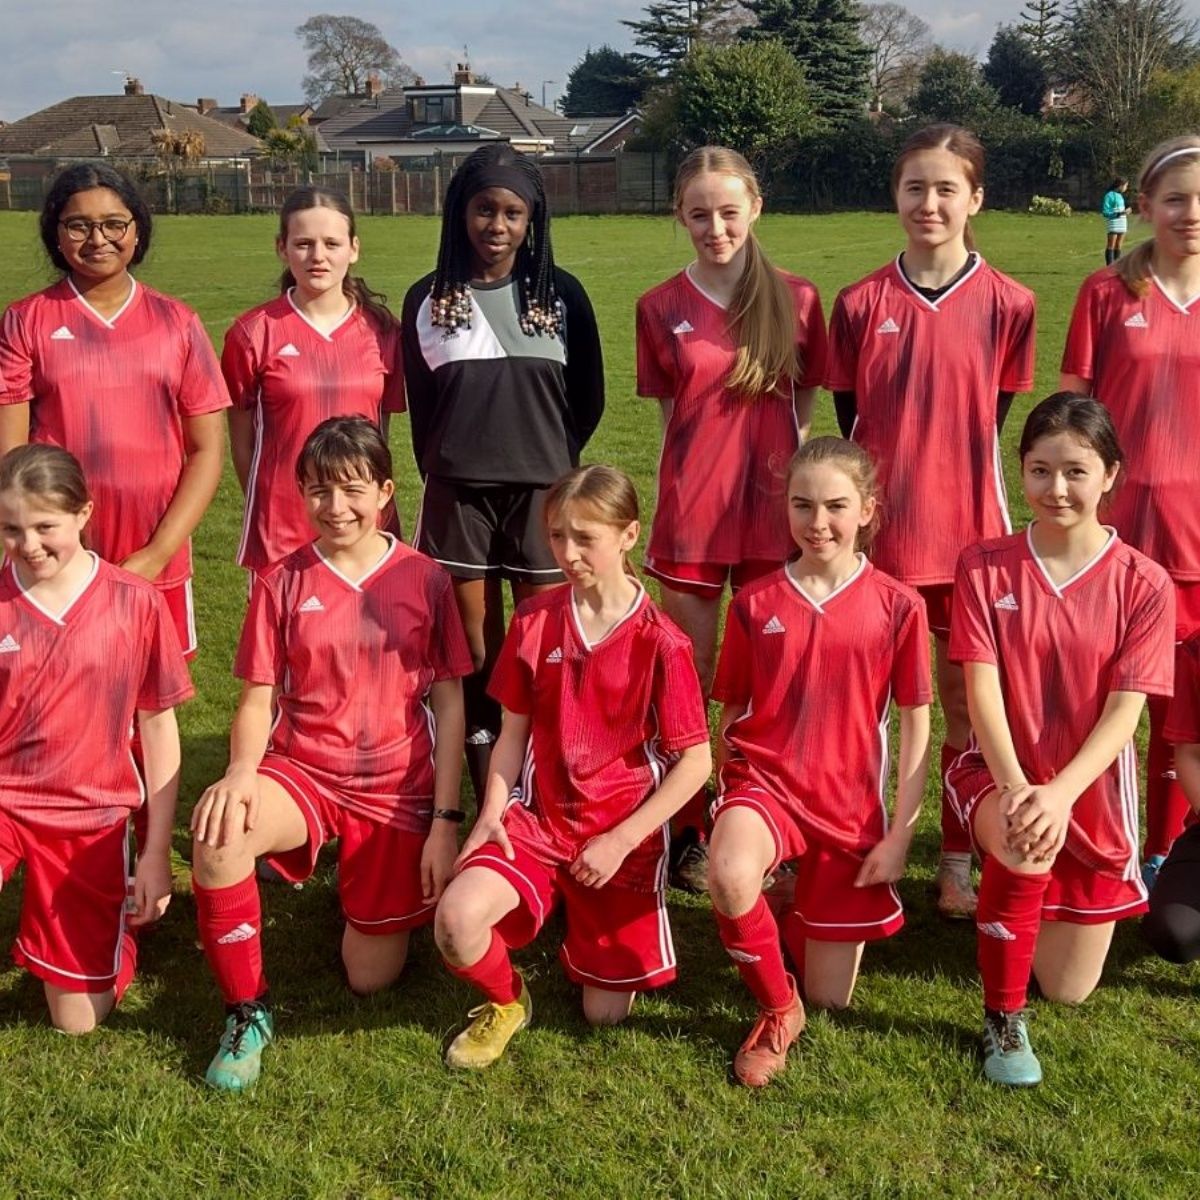 Footballing success: The girls travelled to Wellington High for what would be their toughest challenge yet. stretfordgrammar.com/news/?pid=0&ni…